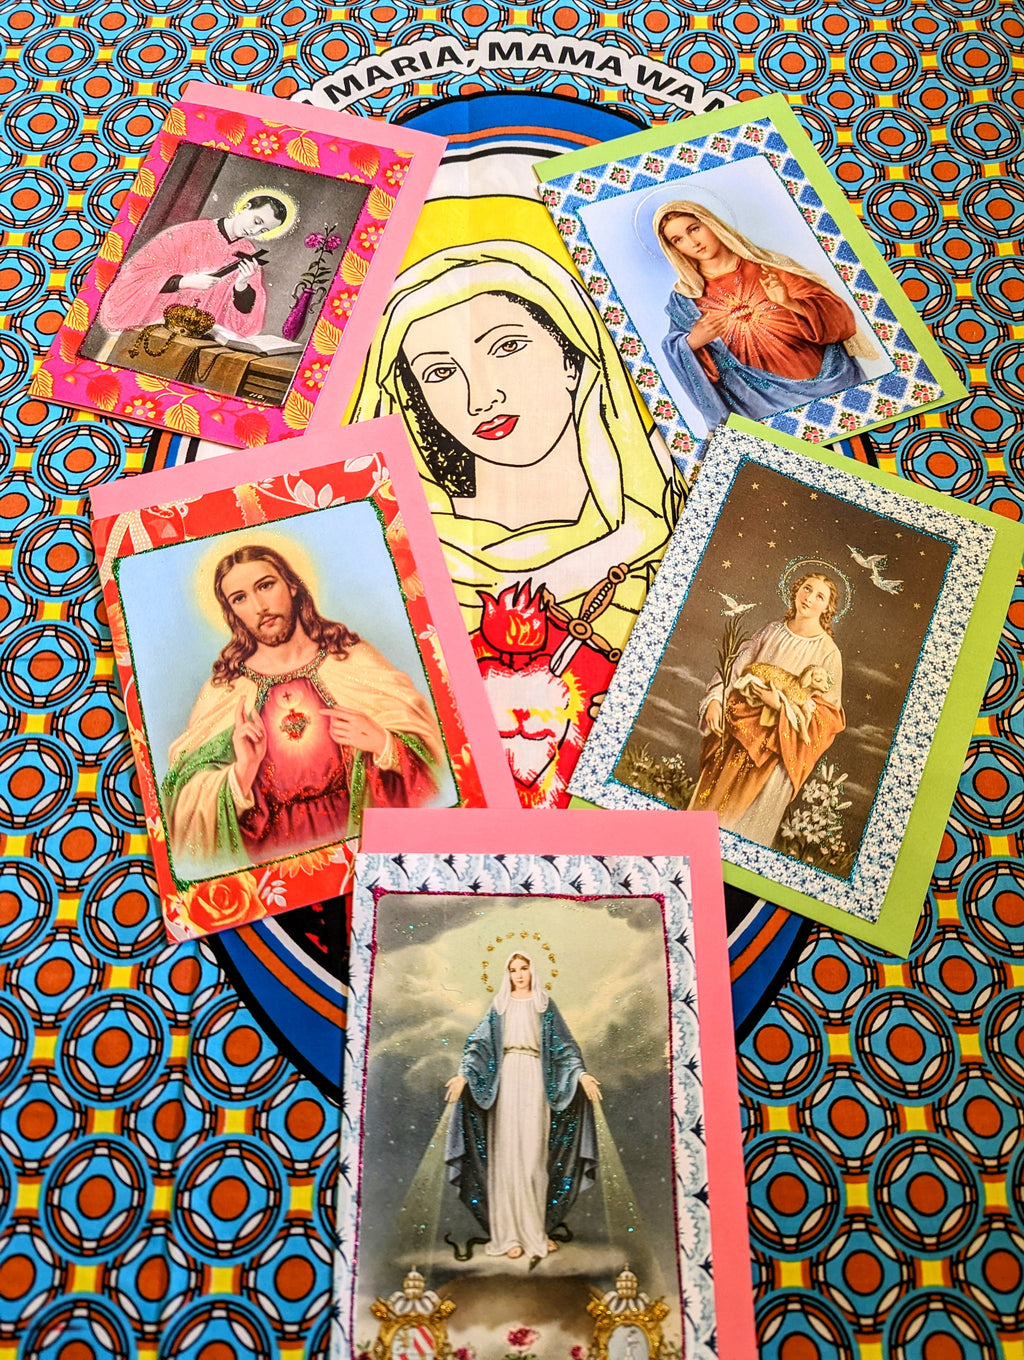 A set of five hand glittered greetings cards of a saintly nature!

15 x 10.5cm each

Set of 5
Religious greetings card
Vintage religious
Kitsch
